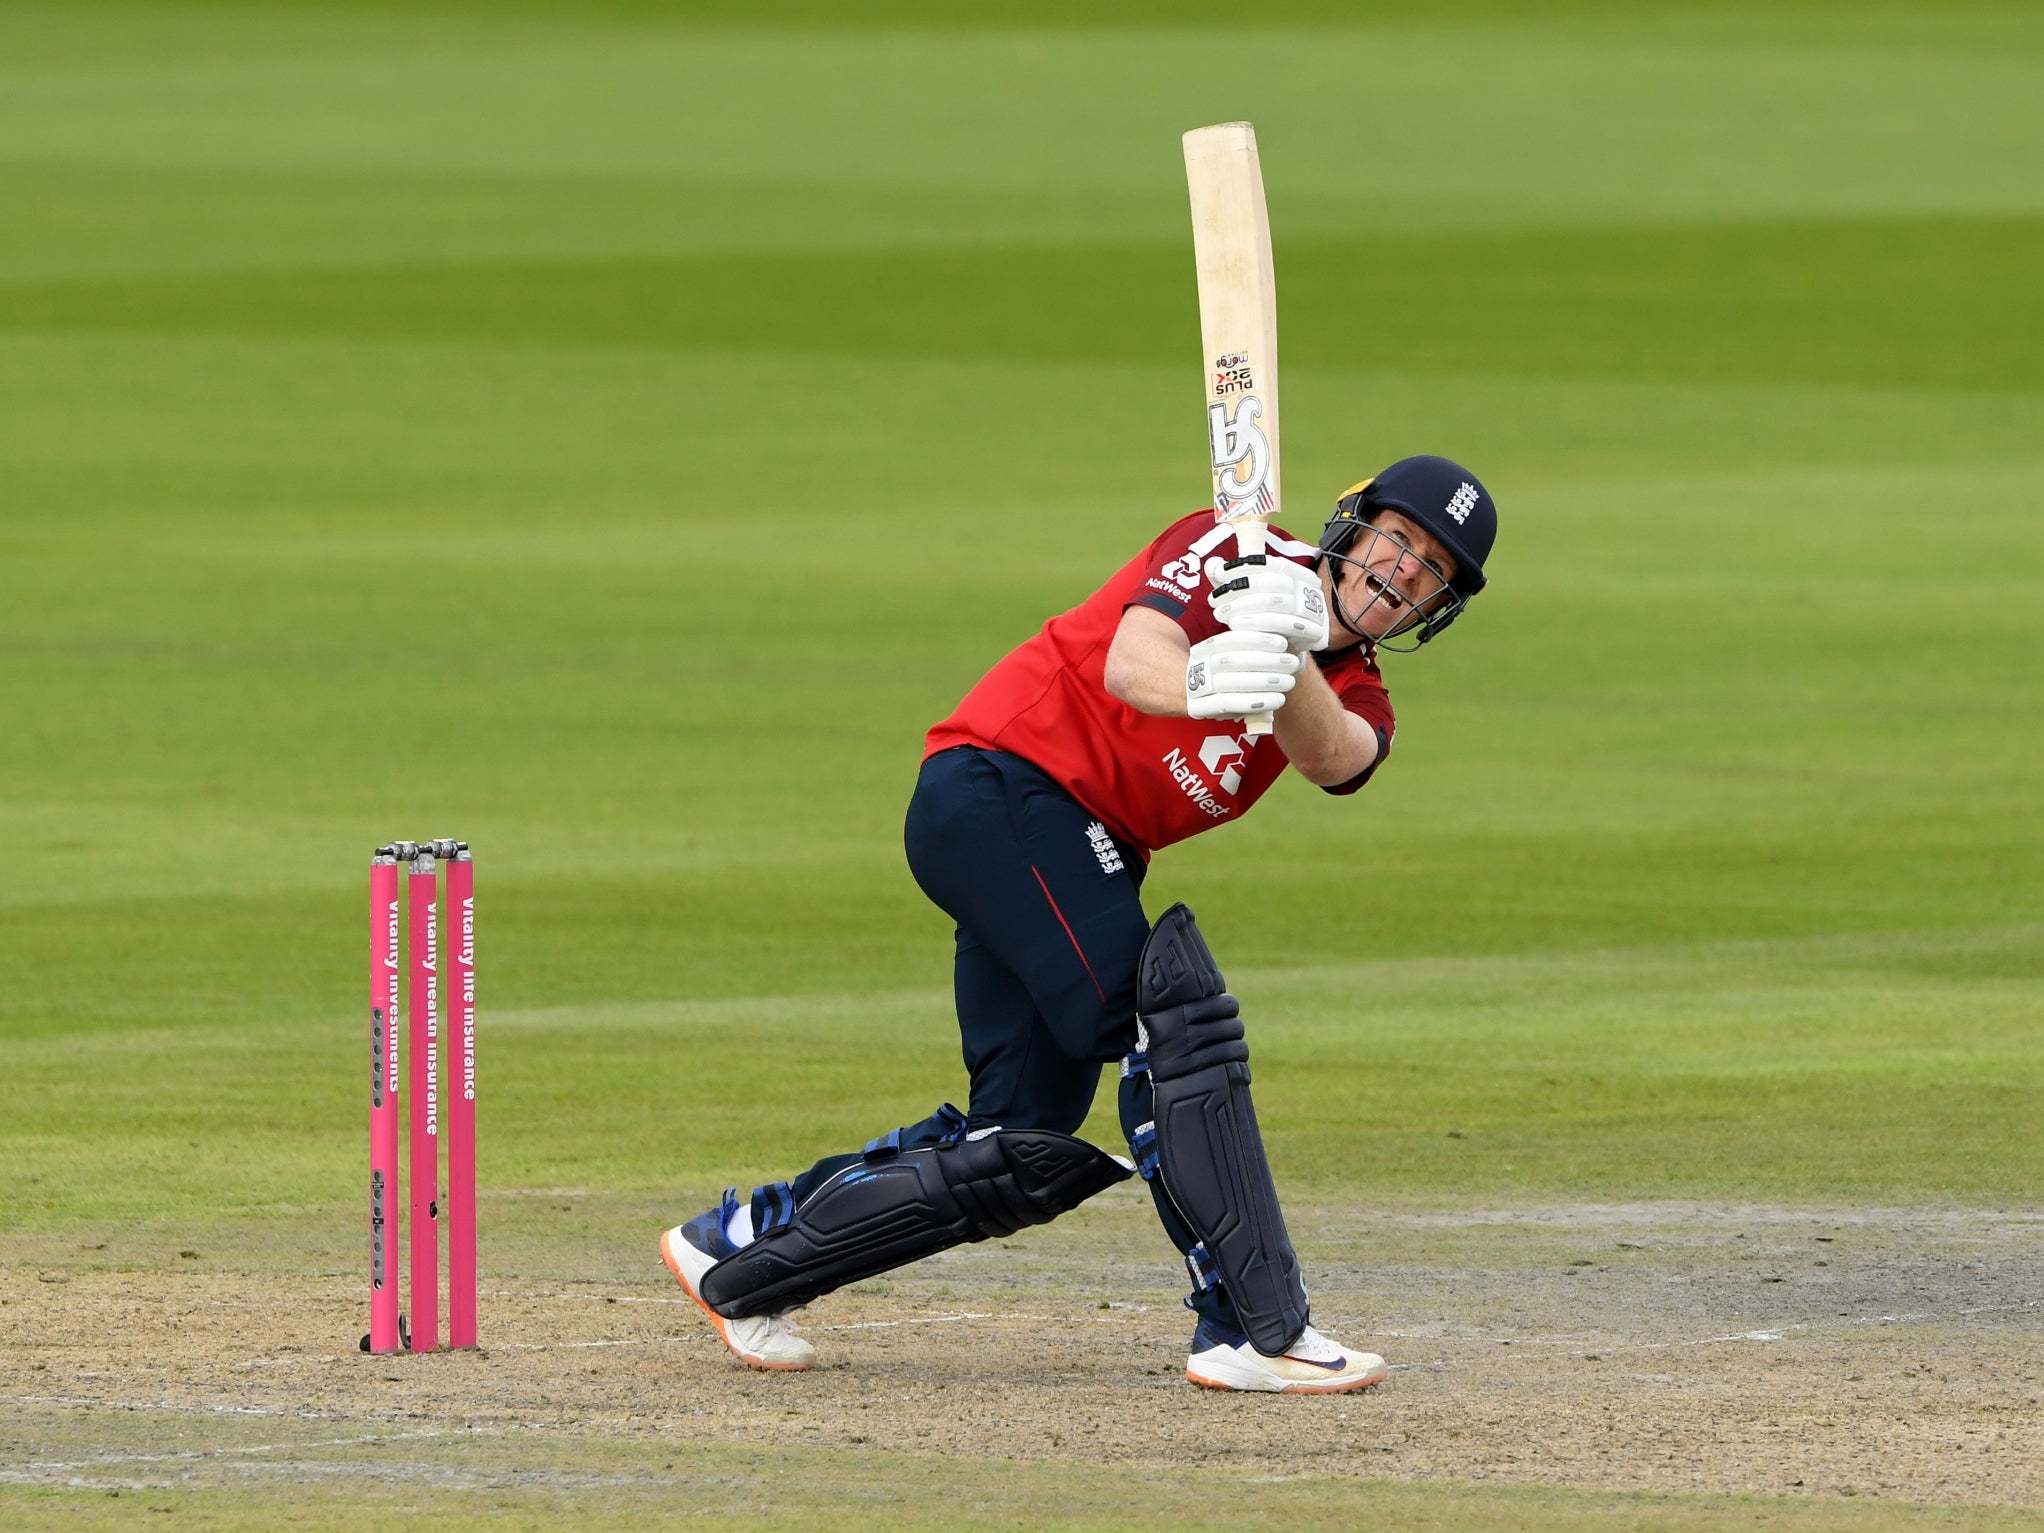 Eoin Morgan inspires England to victory against Pakistan in first T20